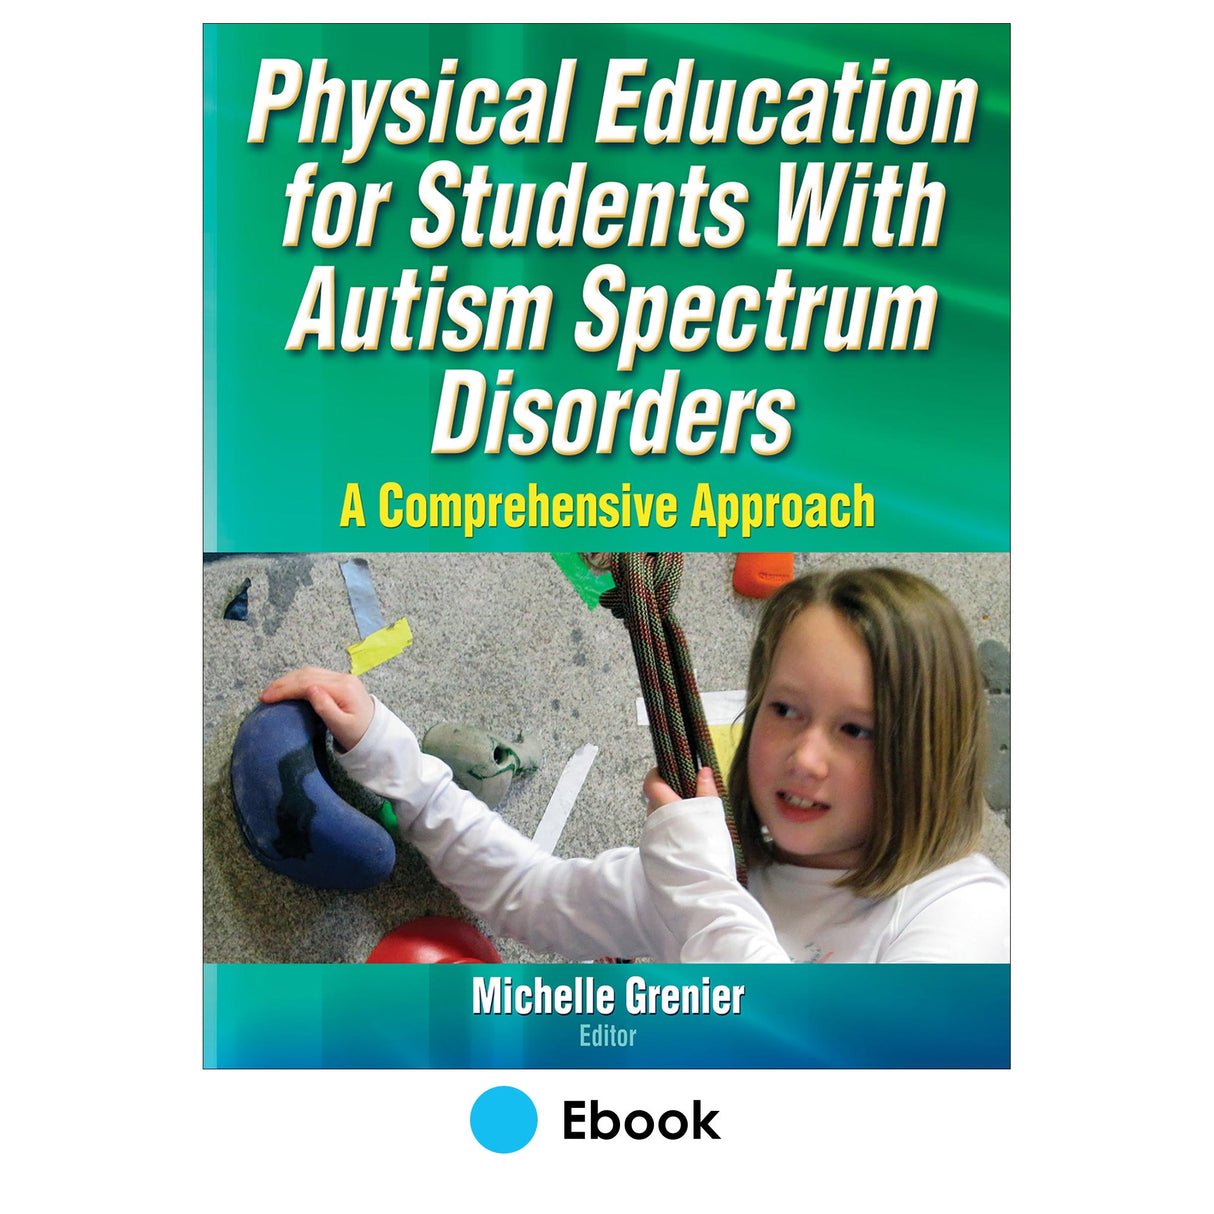 Physical Education for Students With Autism Spectrum Disorders PDF